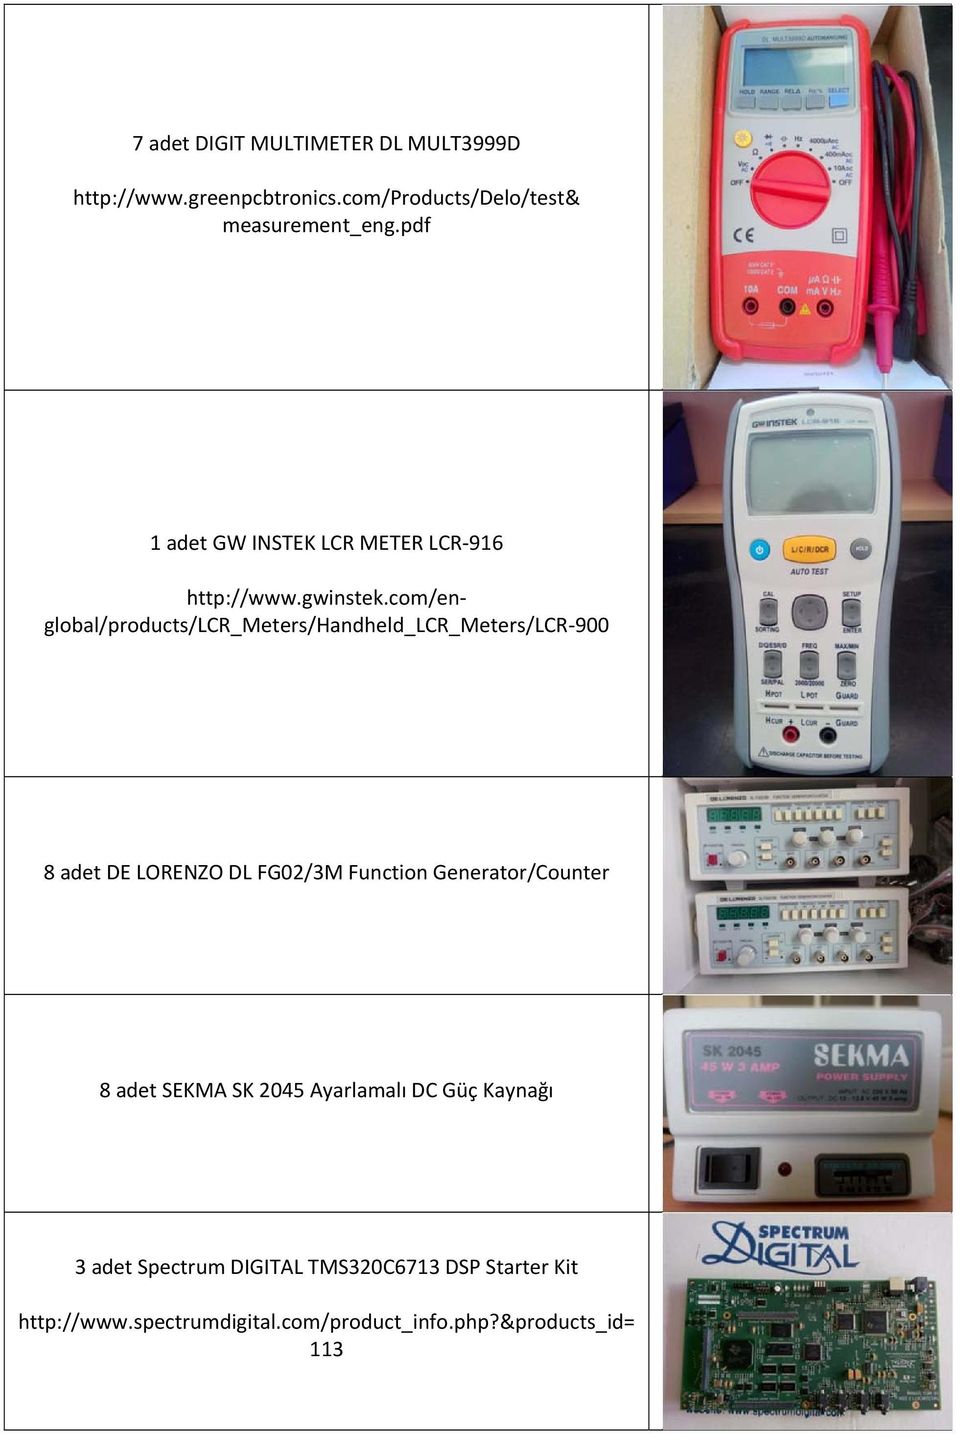 com/englobal/products/lcr_meters/handheld_lcr_meters/lcr 900 8 adet DE LORENZO DL FG02/3M Function